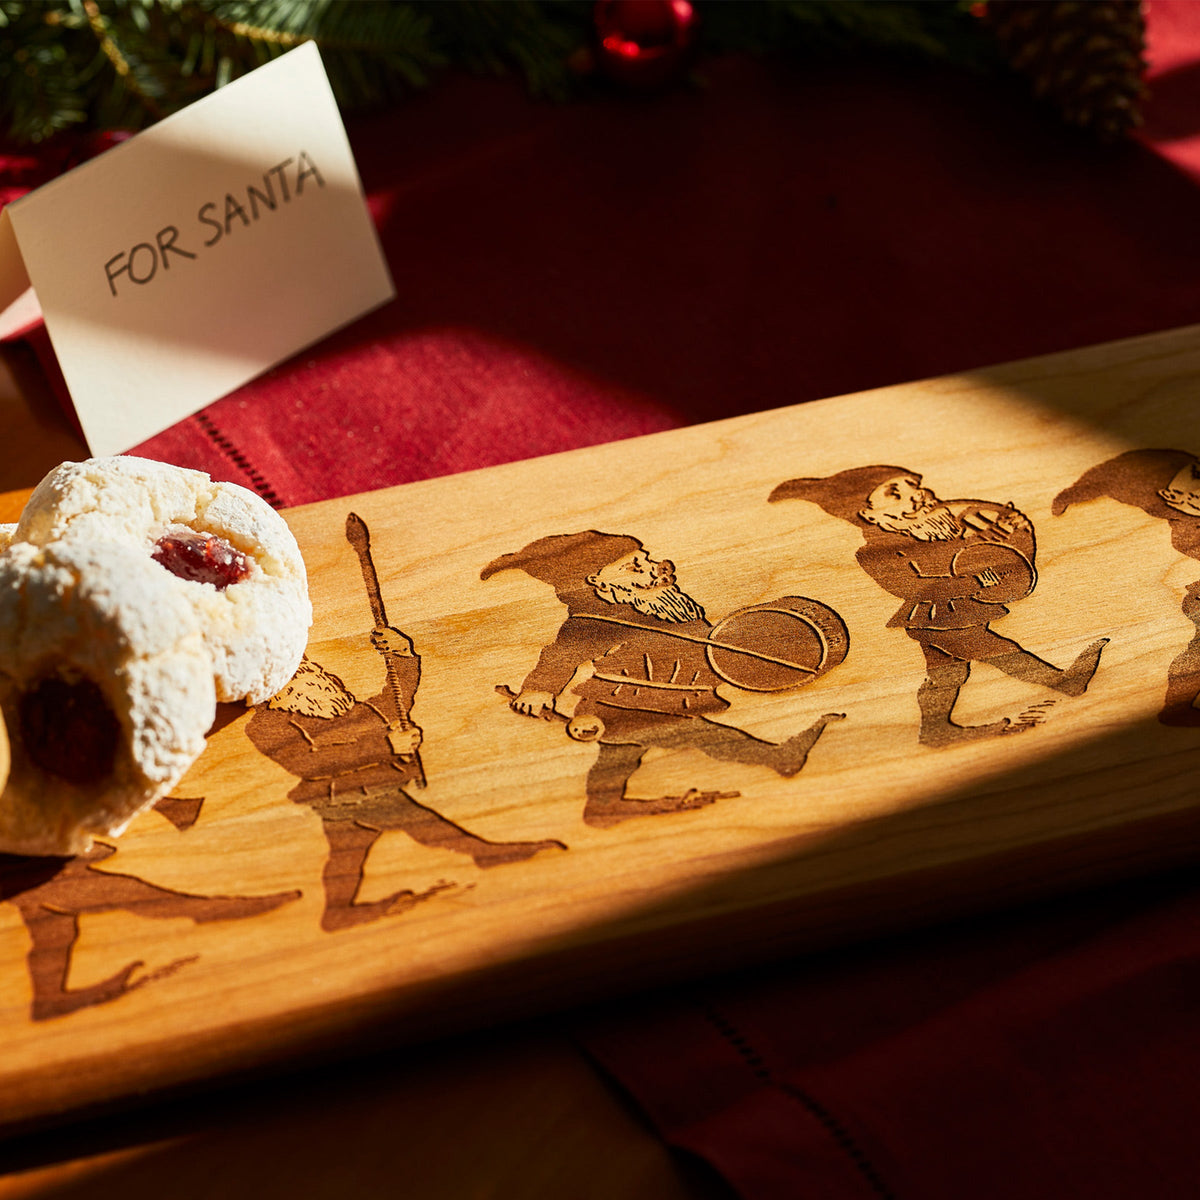 An Elves Serving Board with a holiday whimsy Santa Claus design by Caskata.